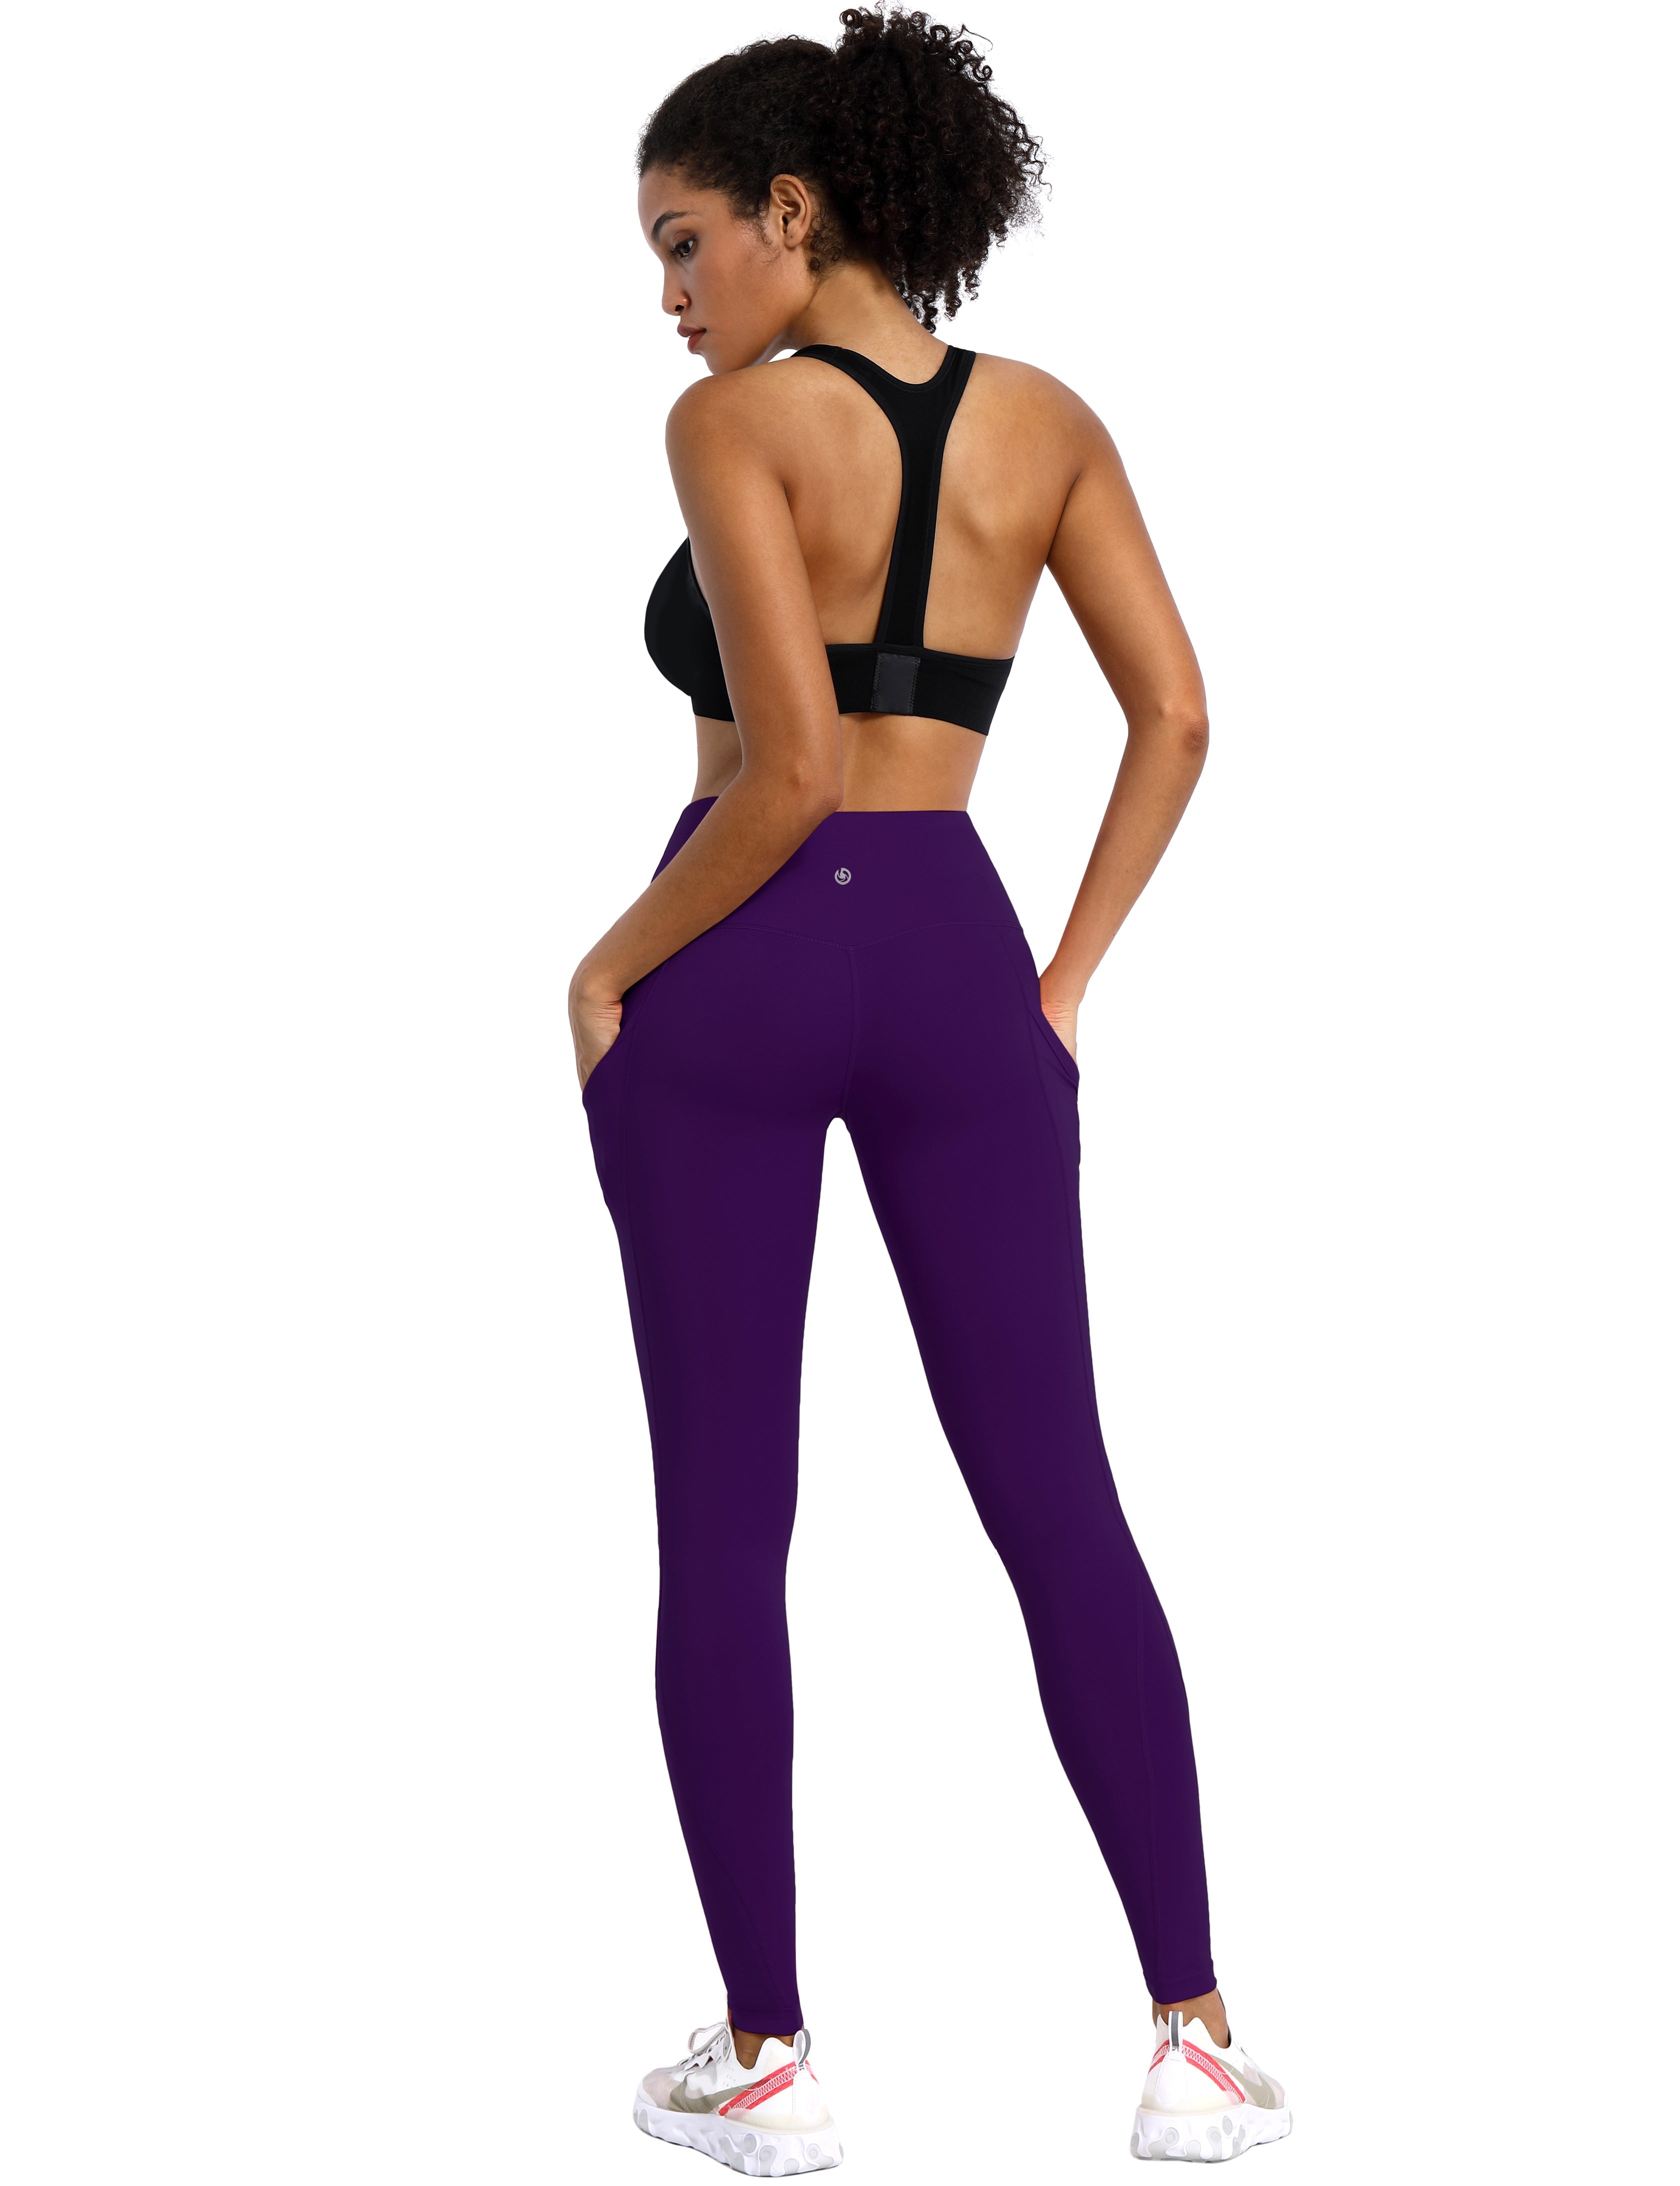 High Waist Side Pockets Running Pants pansypurple 75% Nylon, 25% Spandex Fabric doesn't attract lint easily 4-way stretch No see-through Moisture-wicking Tummy control Inner pocket